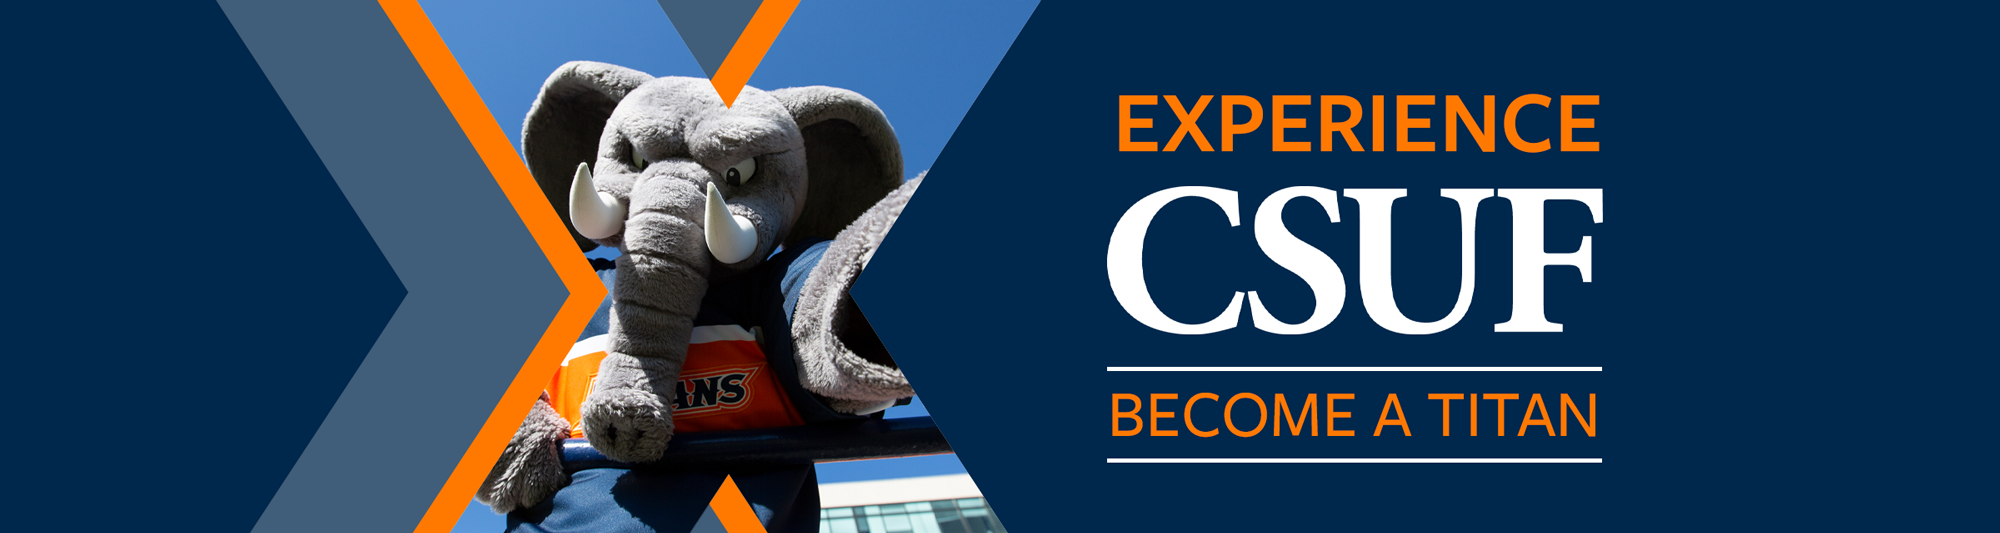 Experieince CSUF and Become a Titan